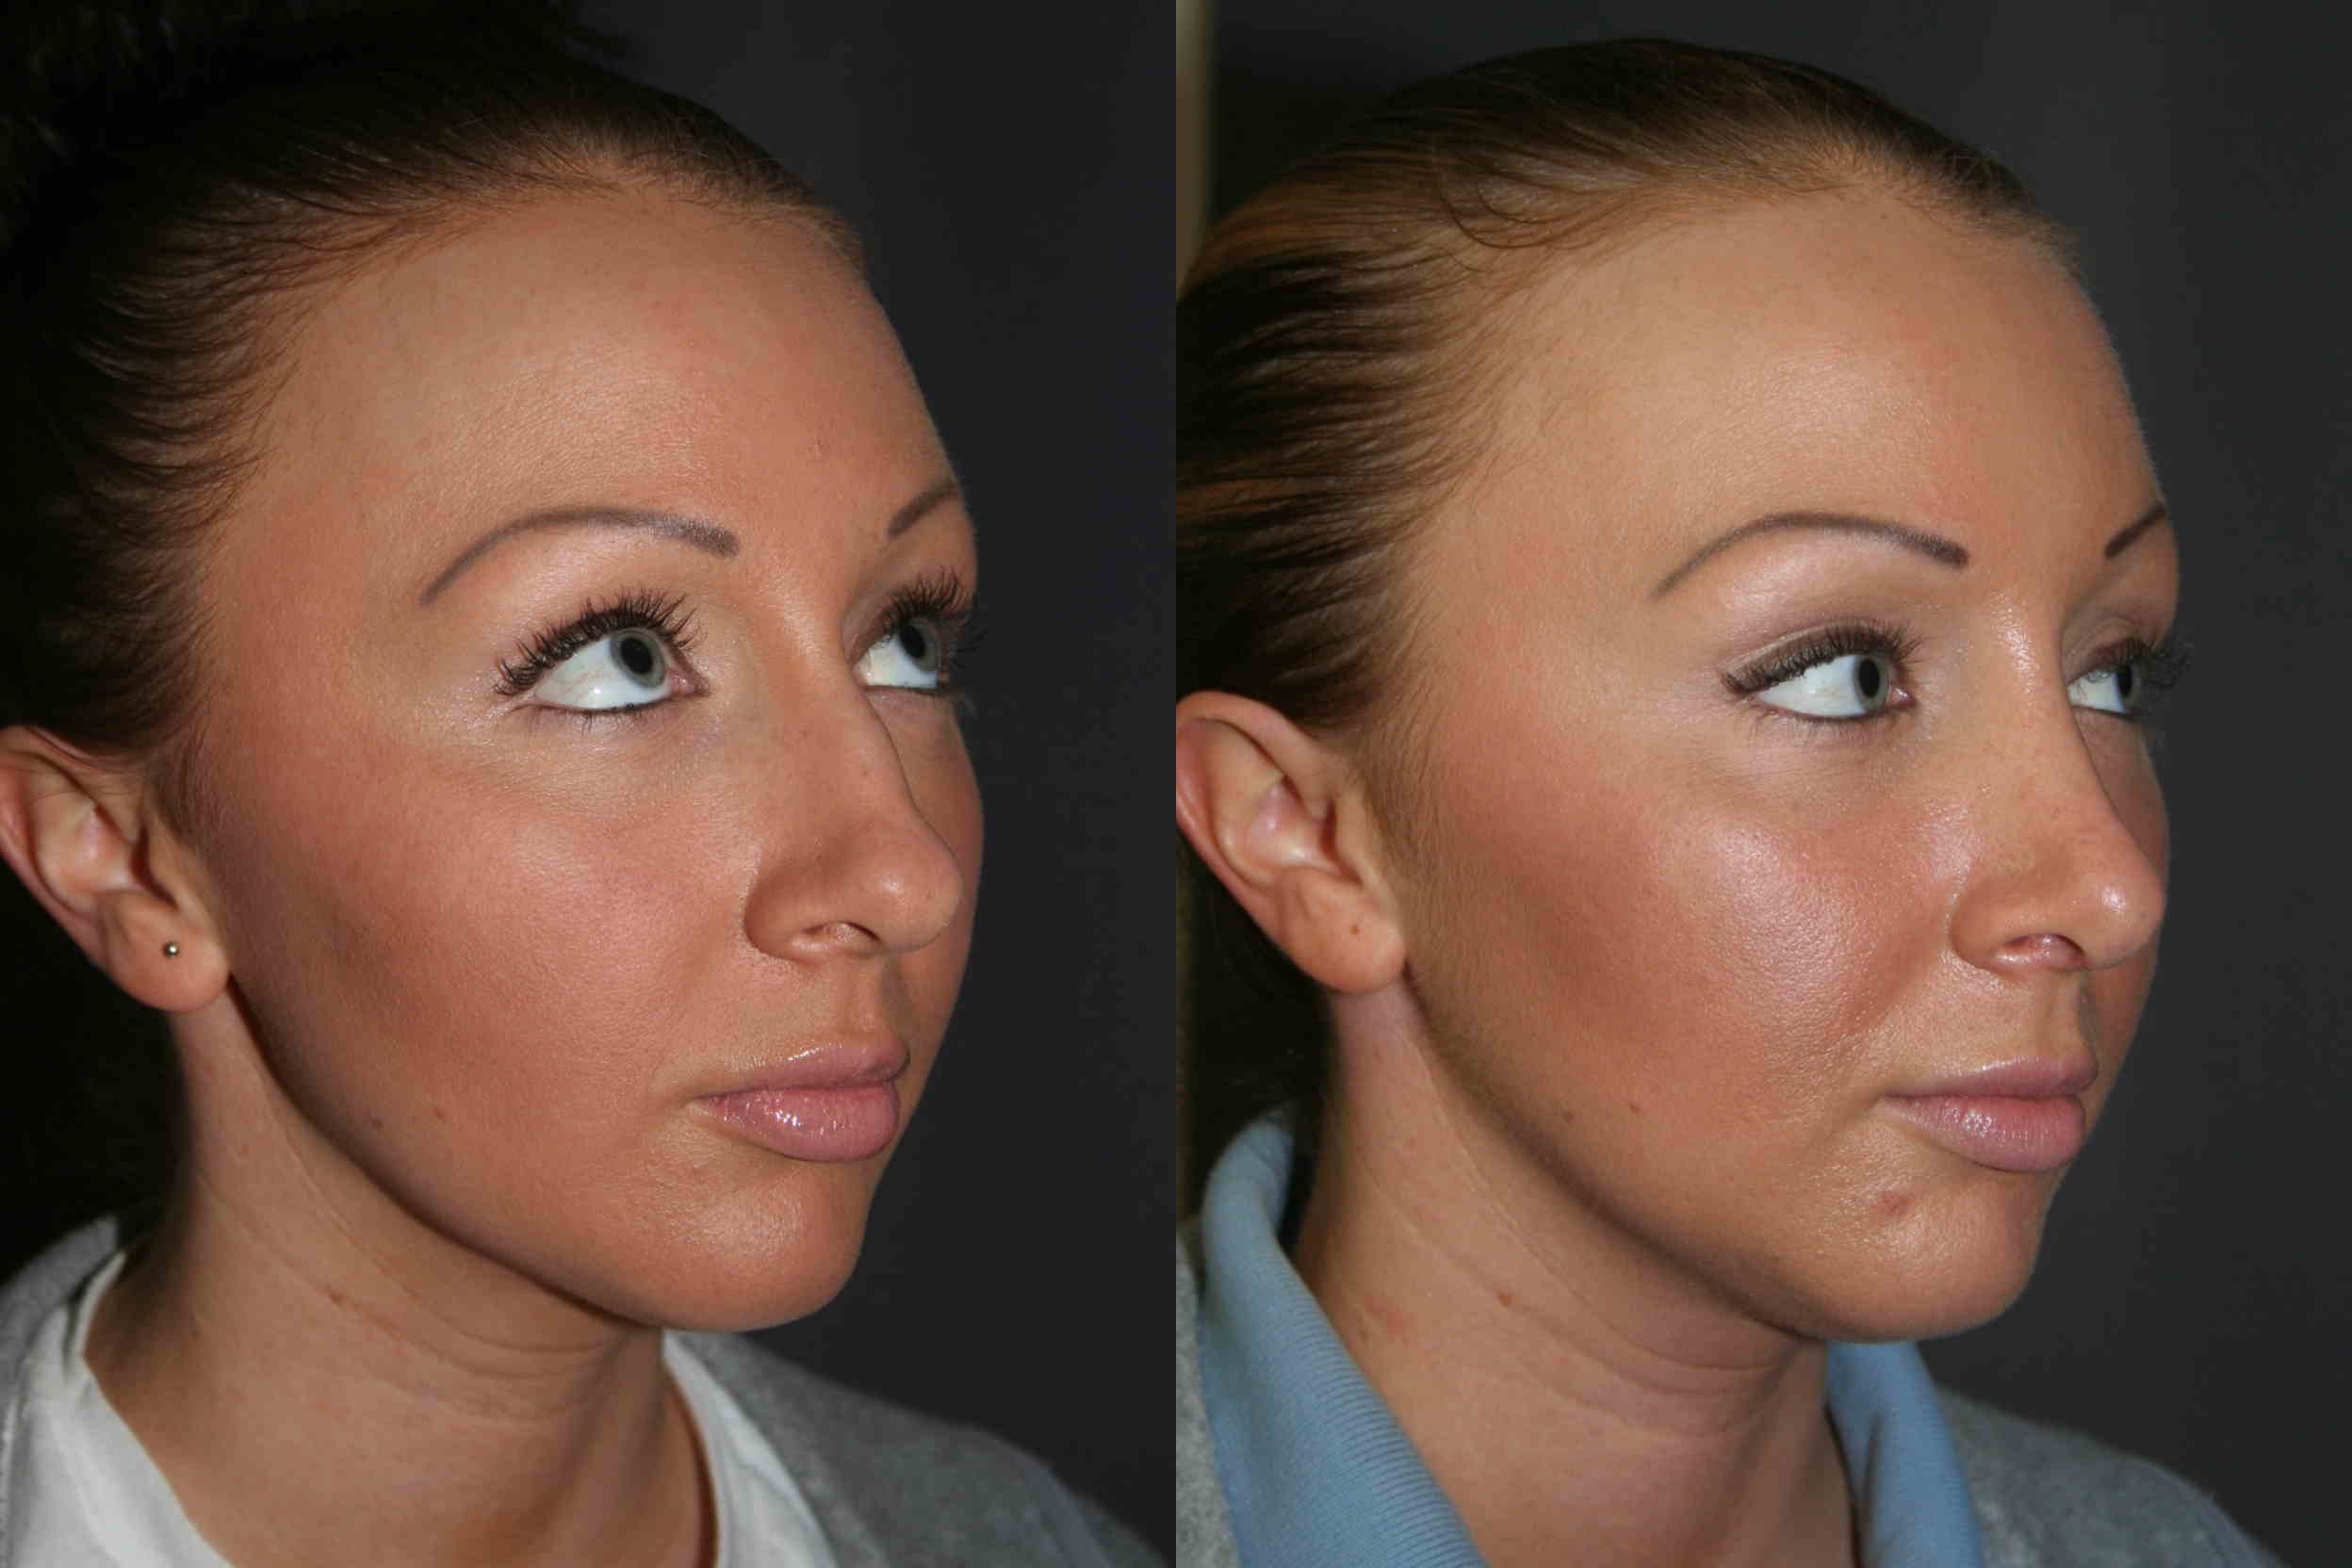 Rhinoplasty Before and After Pictures